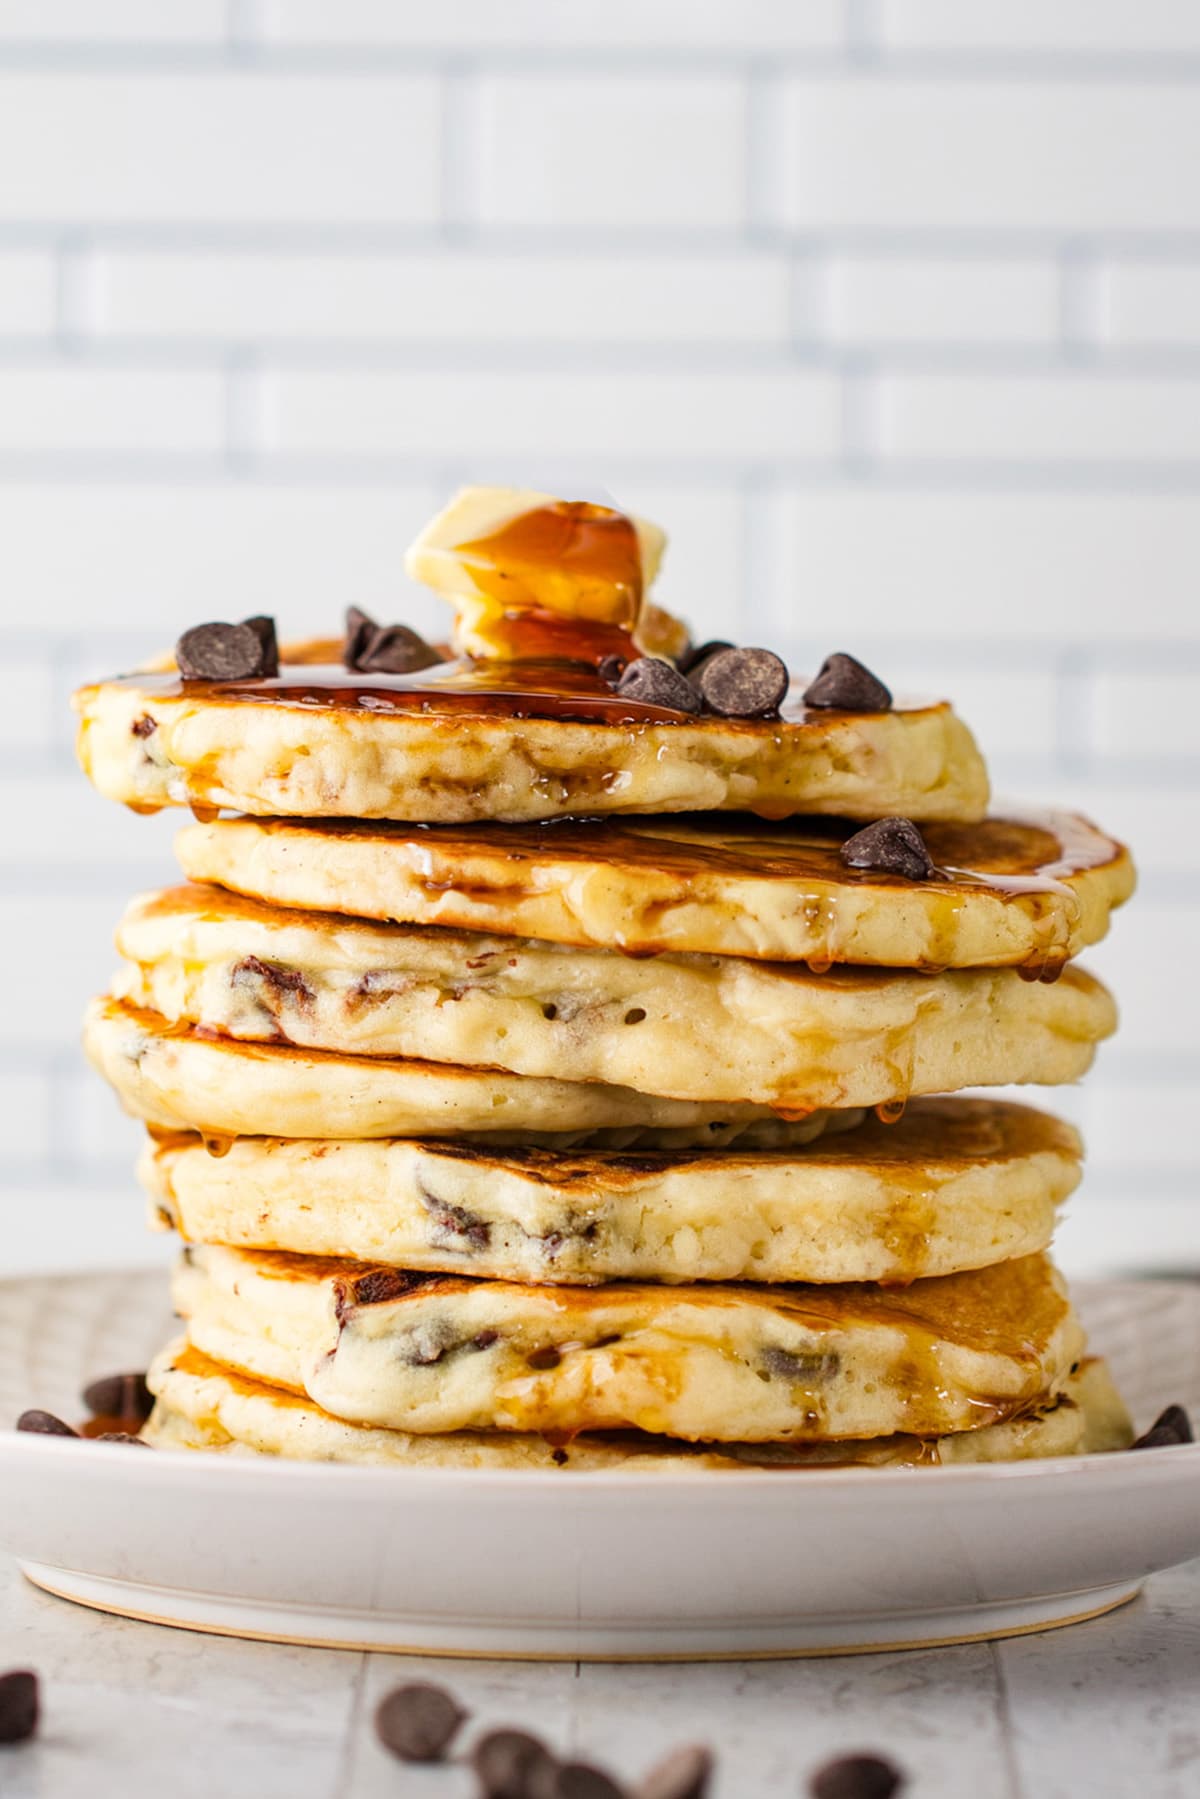 A stack of chocolate chip pancakes topped with chocolate chips, two pats of butter, and plenty of maple syrup.